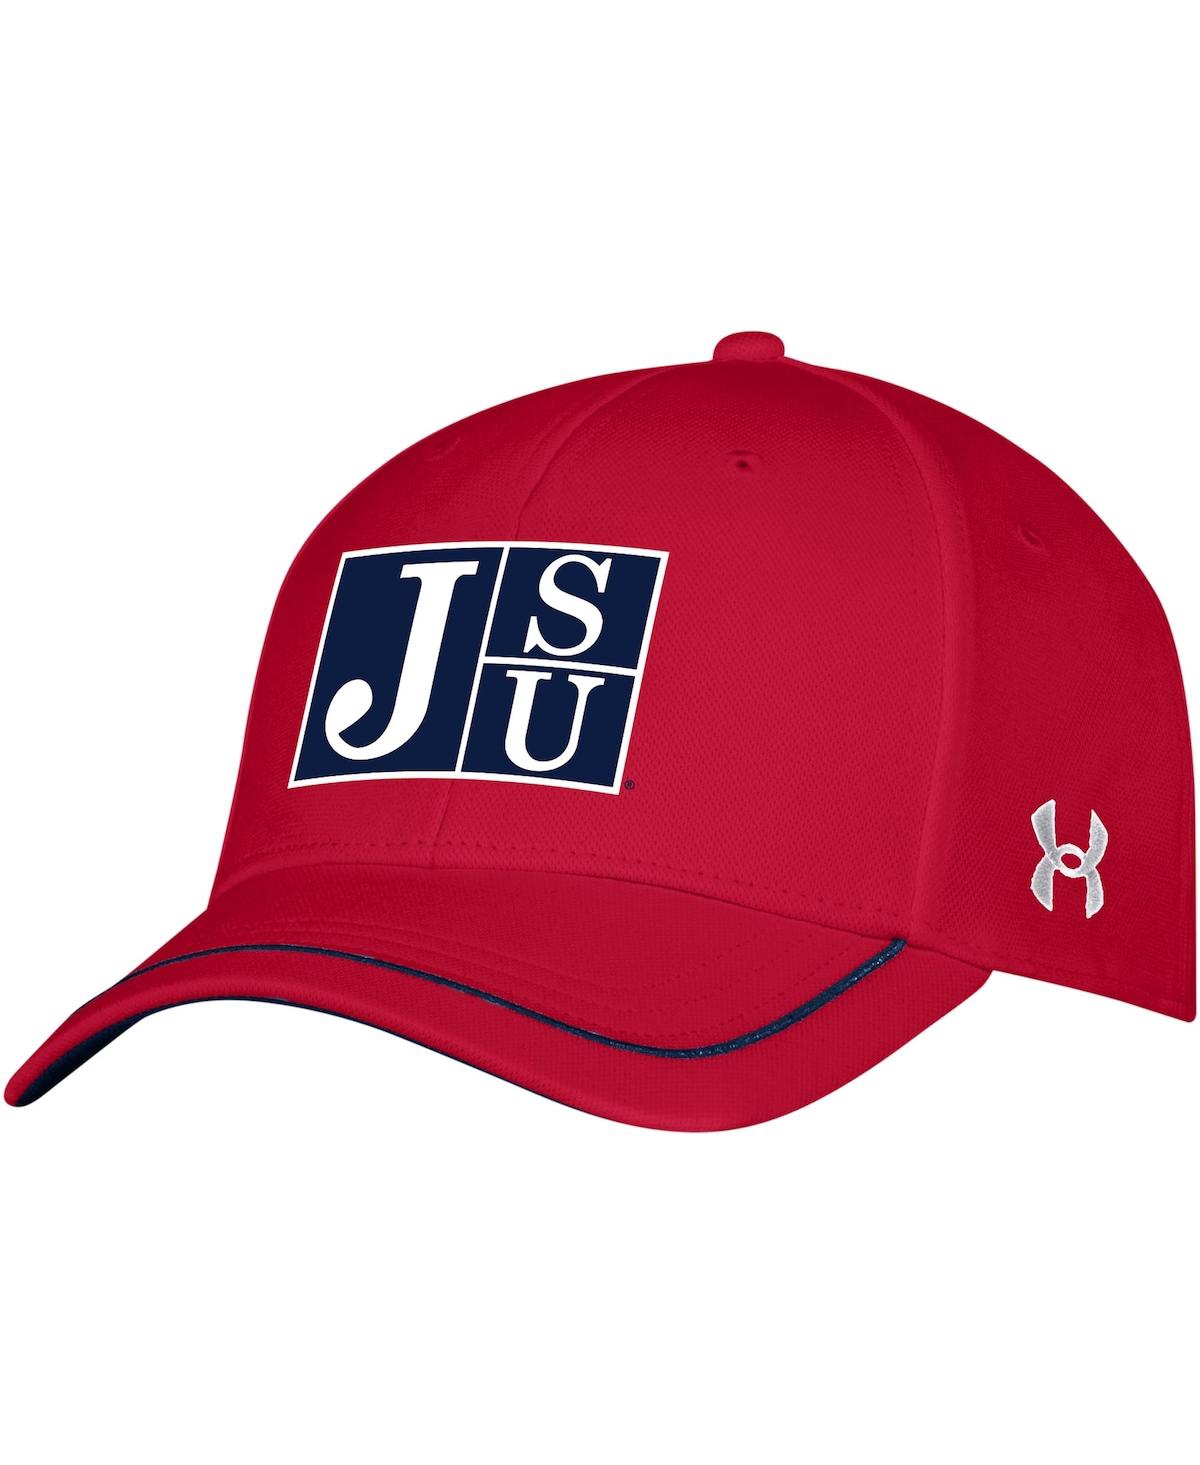 UNDER ARMOUR MEN'S UNDER ARMOUR RED JACKSON STATE TIGERS BLITZING ACCENT ISO-CHILL ADJUSTABLE HAT